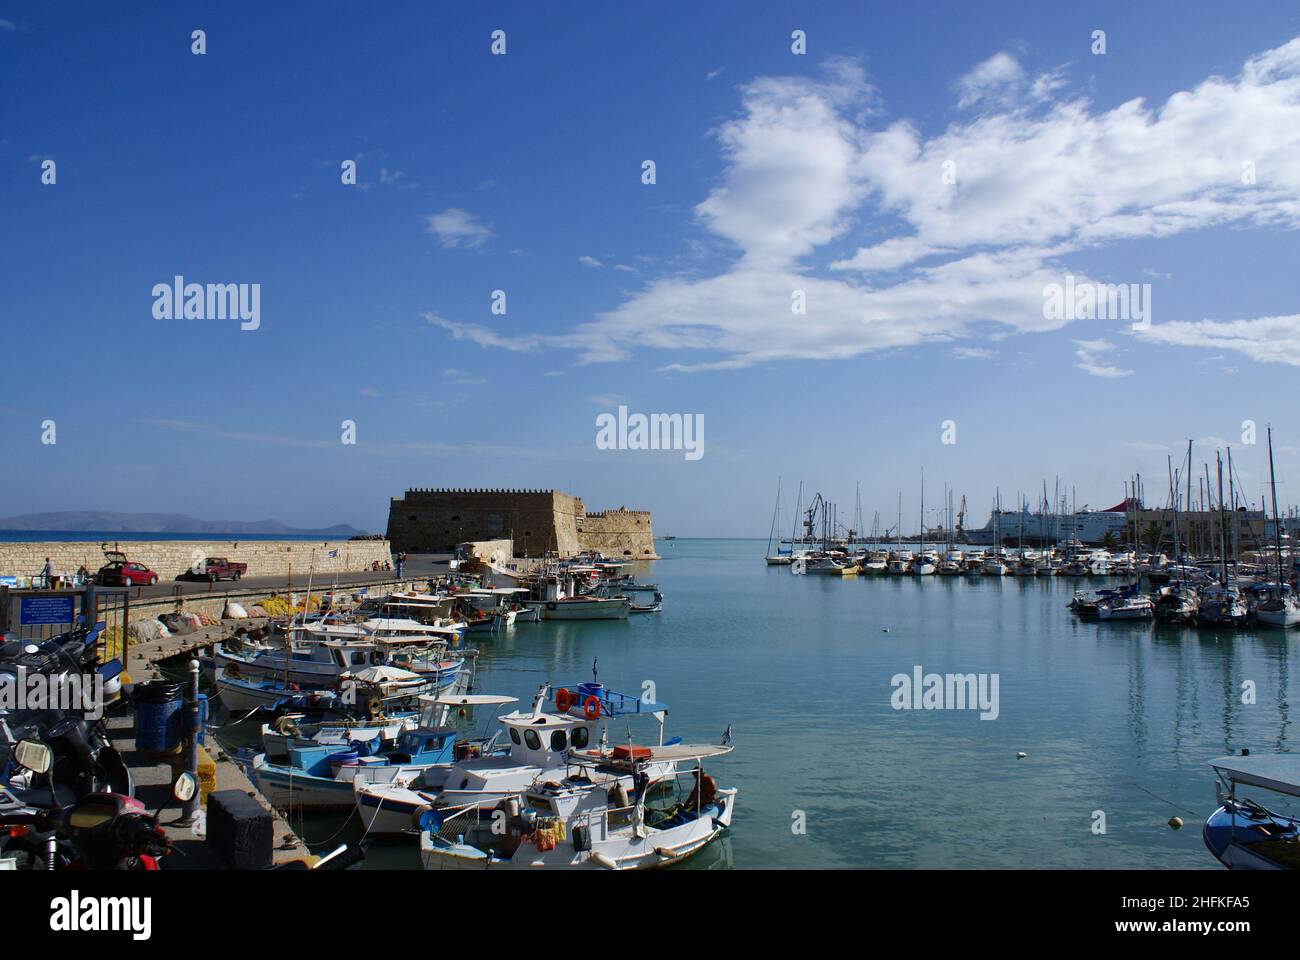 Heraklion, Crete - Greece - October 15 2010 : Historic old Venetian port, with a view of the old fortress, guarding the harbor. Colorful small fishing Stock Photo